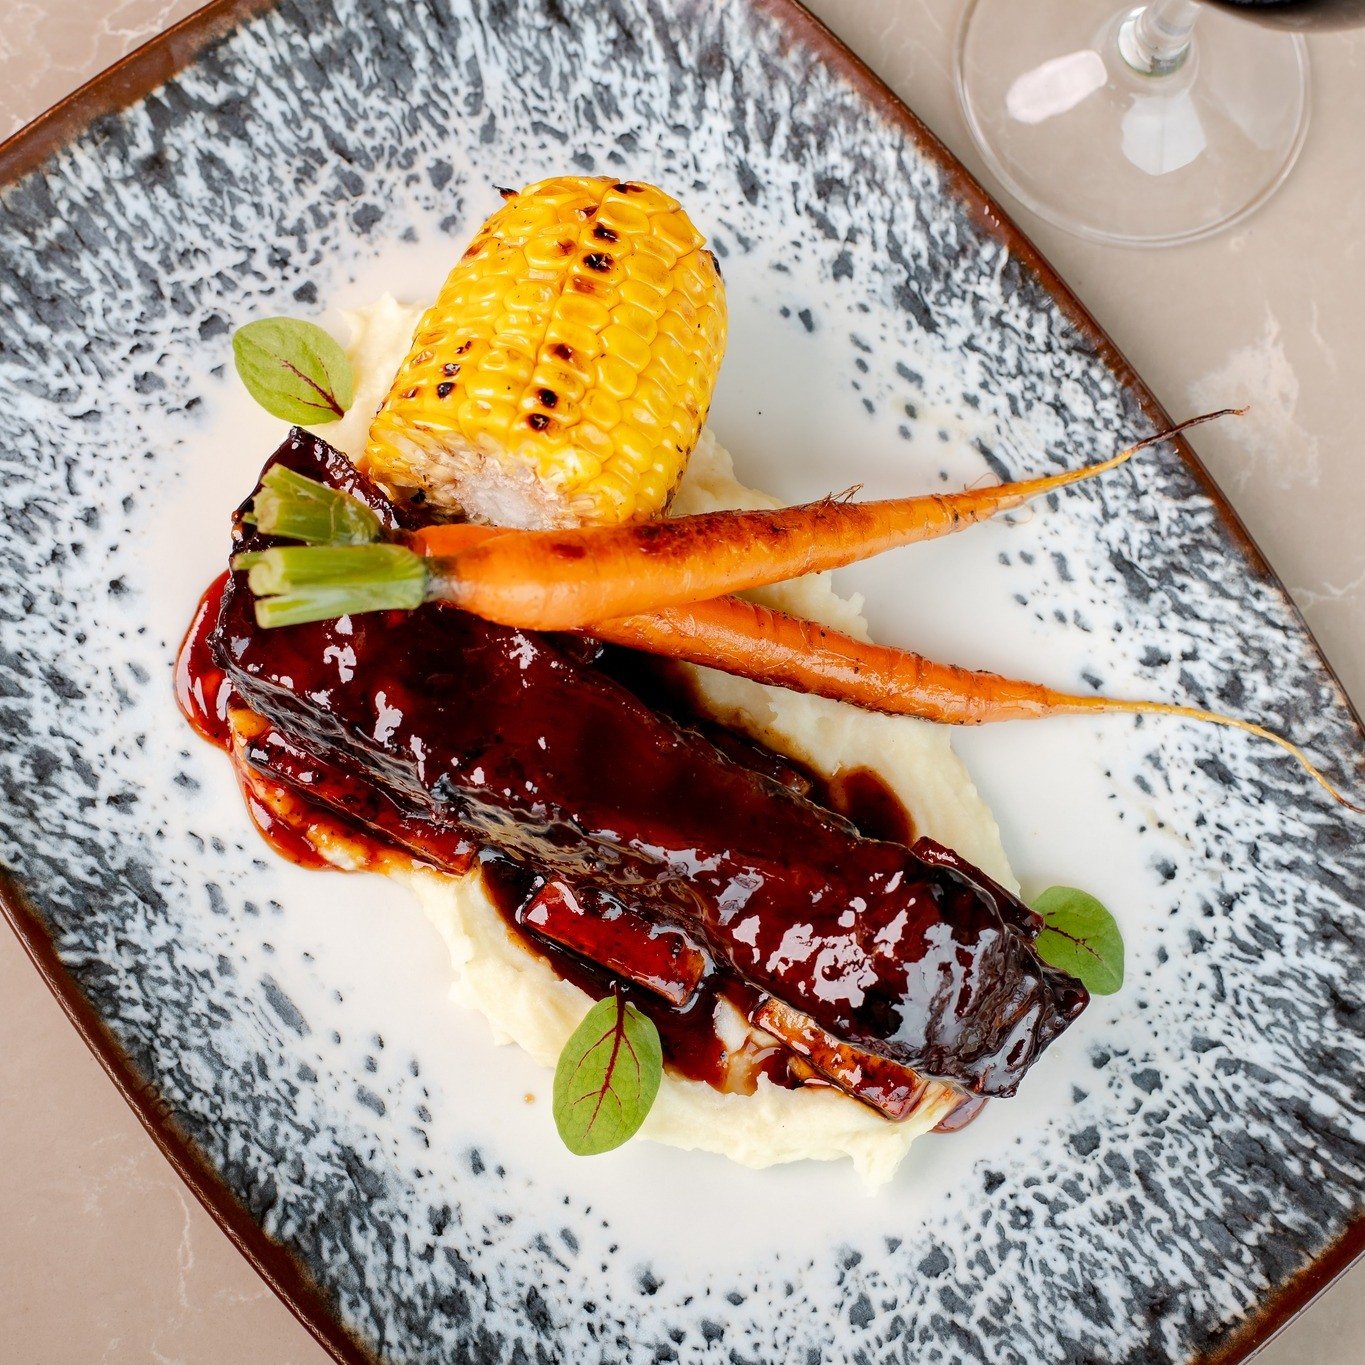 Have you tried our Beef Asado Ribs yet? 😍😋

Slow-cooked beef short ribs, cauliflower pur&eacute;e, roasted carrots, buttered grilled corn and homemade sticky barbeque sauce 🙌

#delicious #dining #cronullarsl #cronulladining #cronulla #cronullabeac